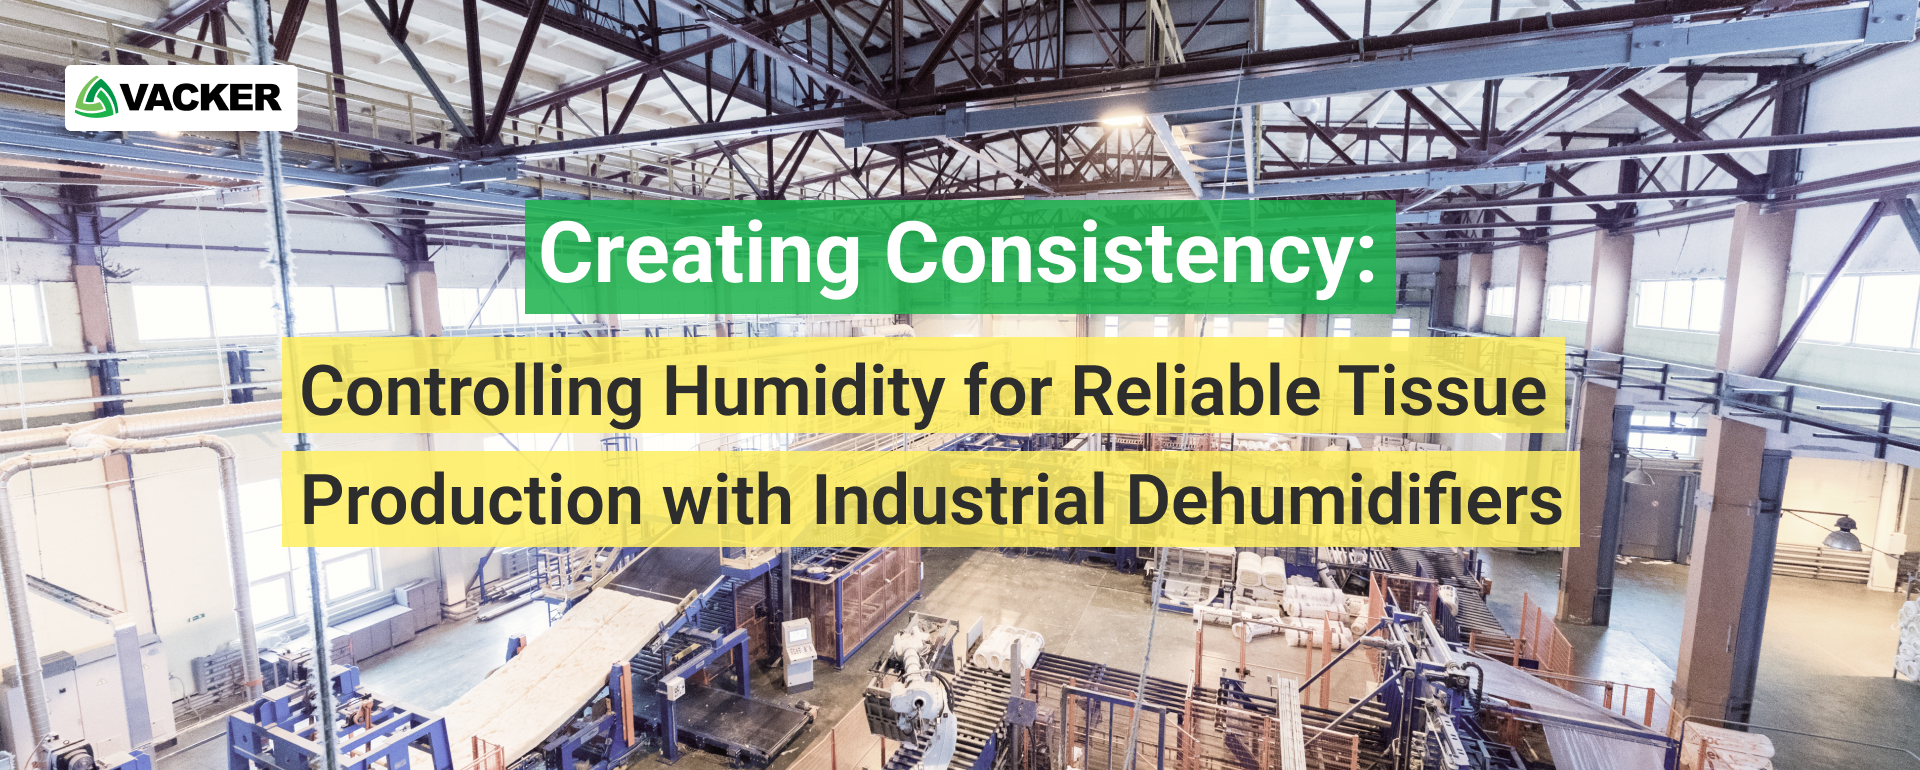 Creating Consistency: Controlling Humidity for Reliable Tissue Production with Industrial Dehumidifiers